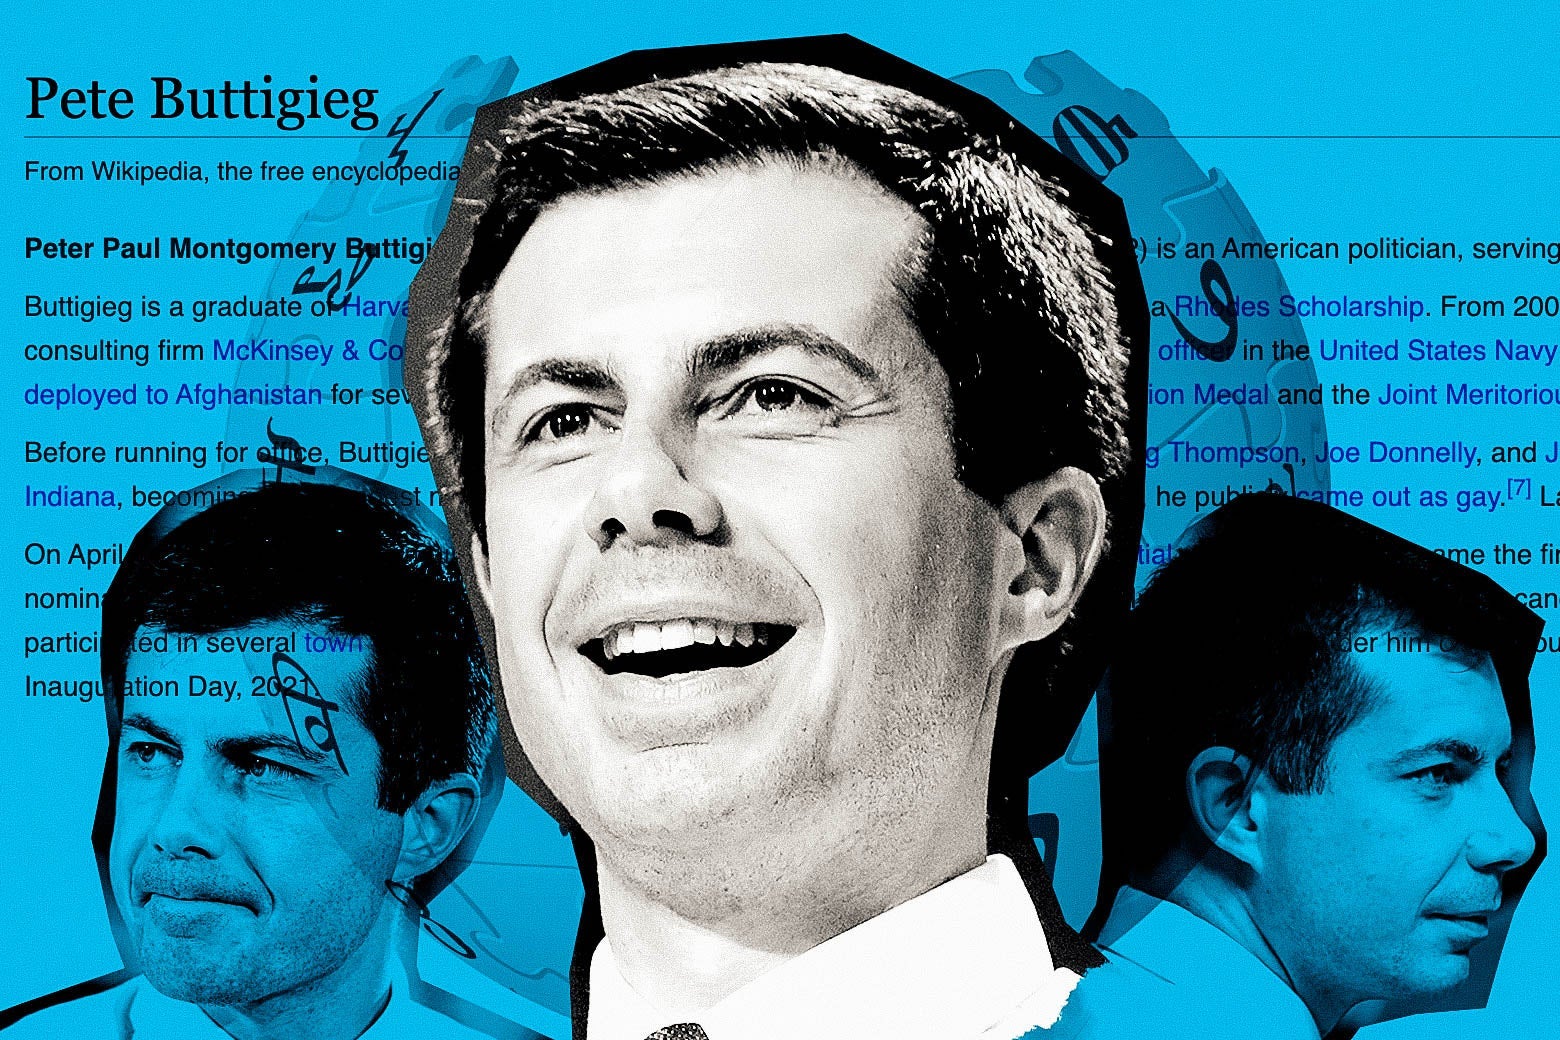 Various Pete Buttigieg faces collaged over his Wikipedia page.